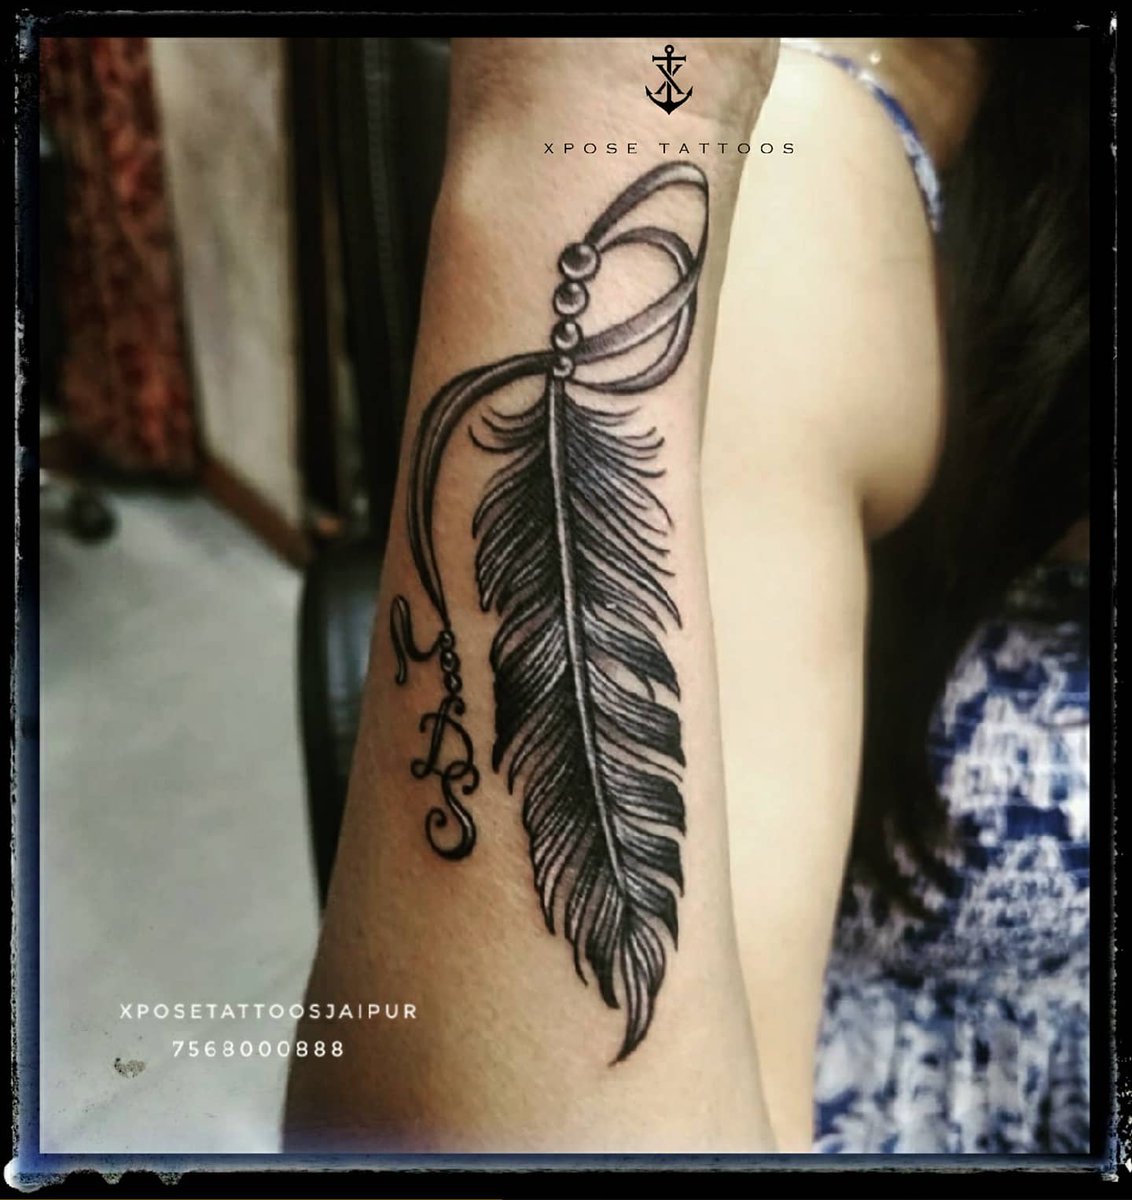 Feather tattoo with initials on side wrist
Contact📞: +917568000888    #coveruptattooing #ink #instattoo #tattoos #tattoolover #feathertattoo #initials #featherart #xposetattoos #hearttattoodesign #feathers #feathertattoodesign #featherlove #featherdesigns